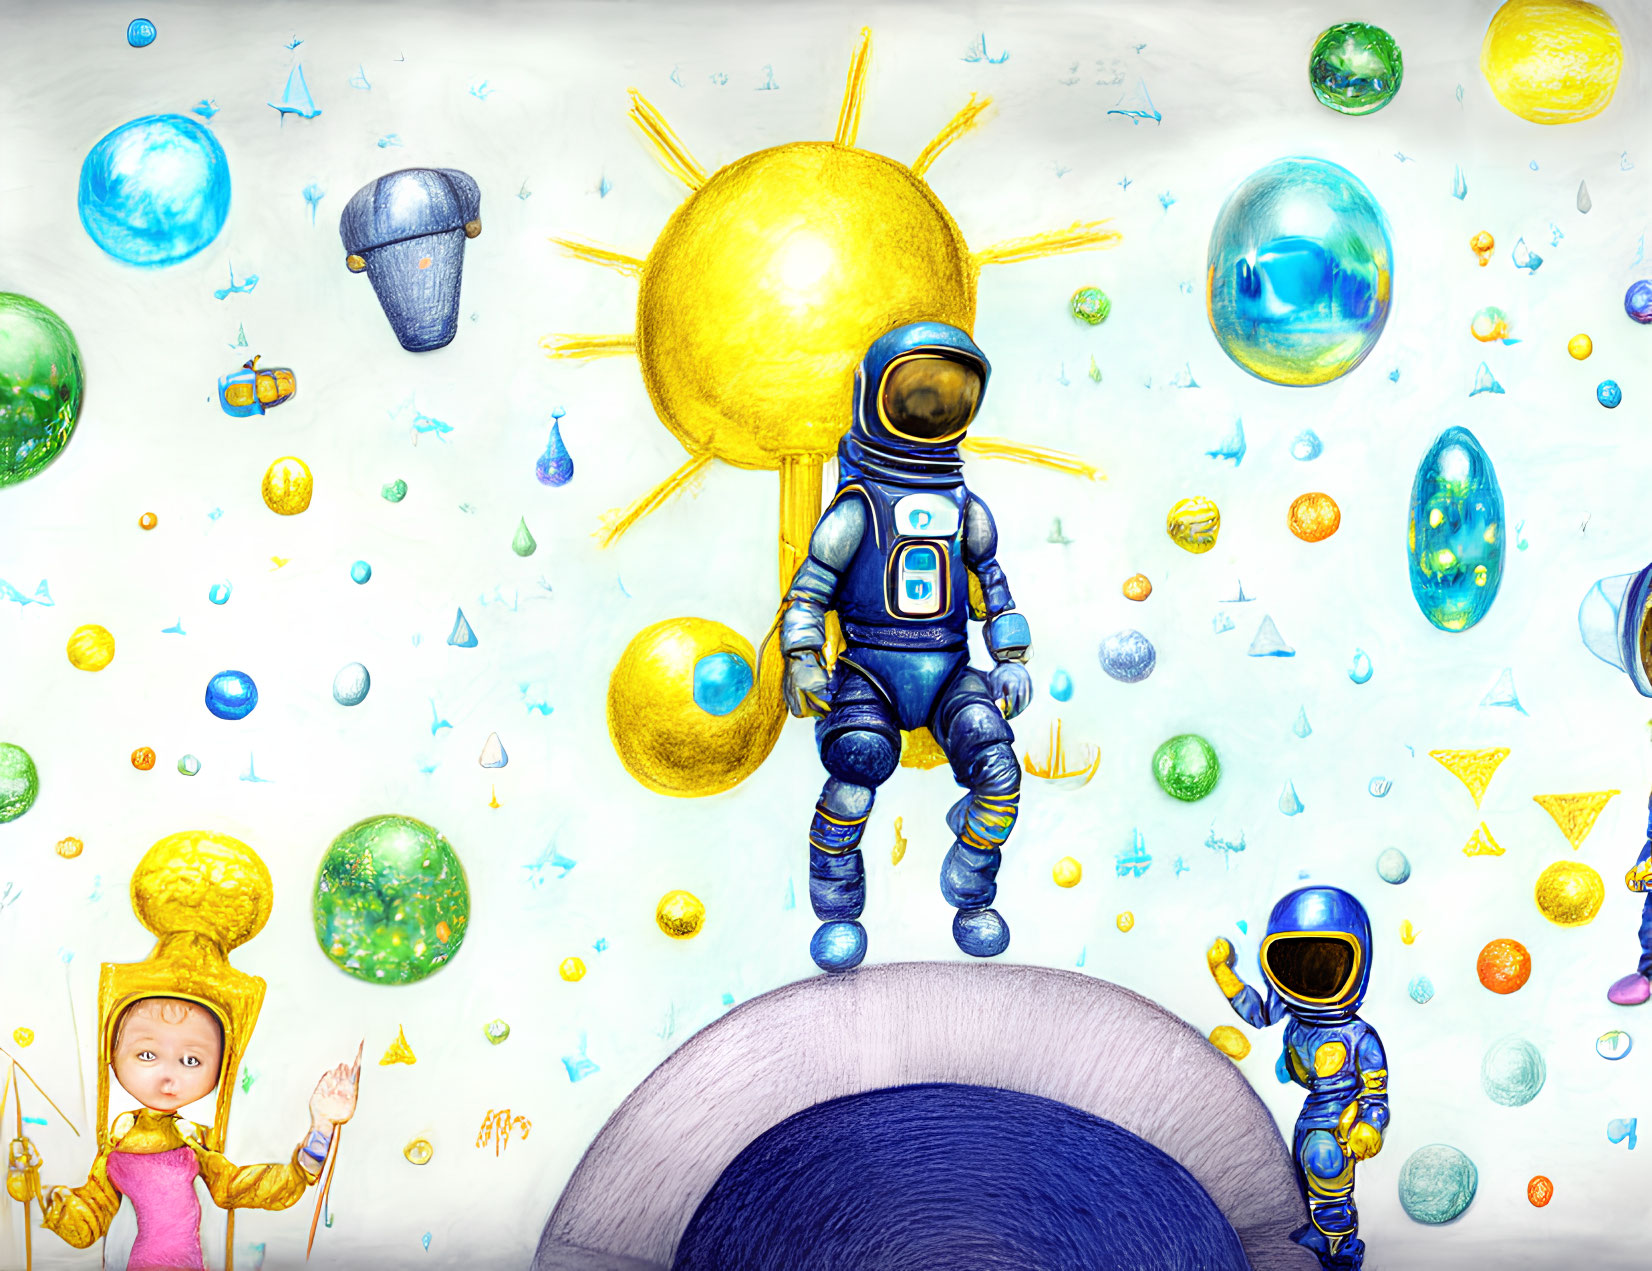 Illustrated space scene with astronauts, sun, celestial bodies, and child with scepter